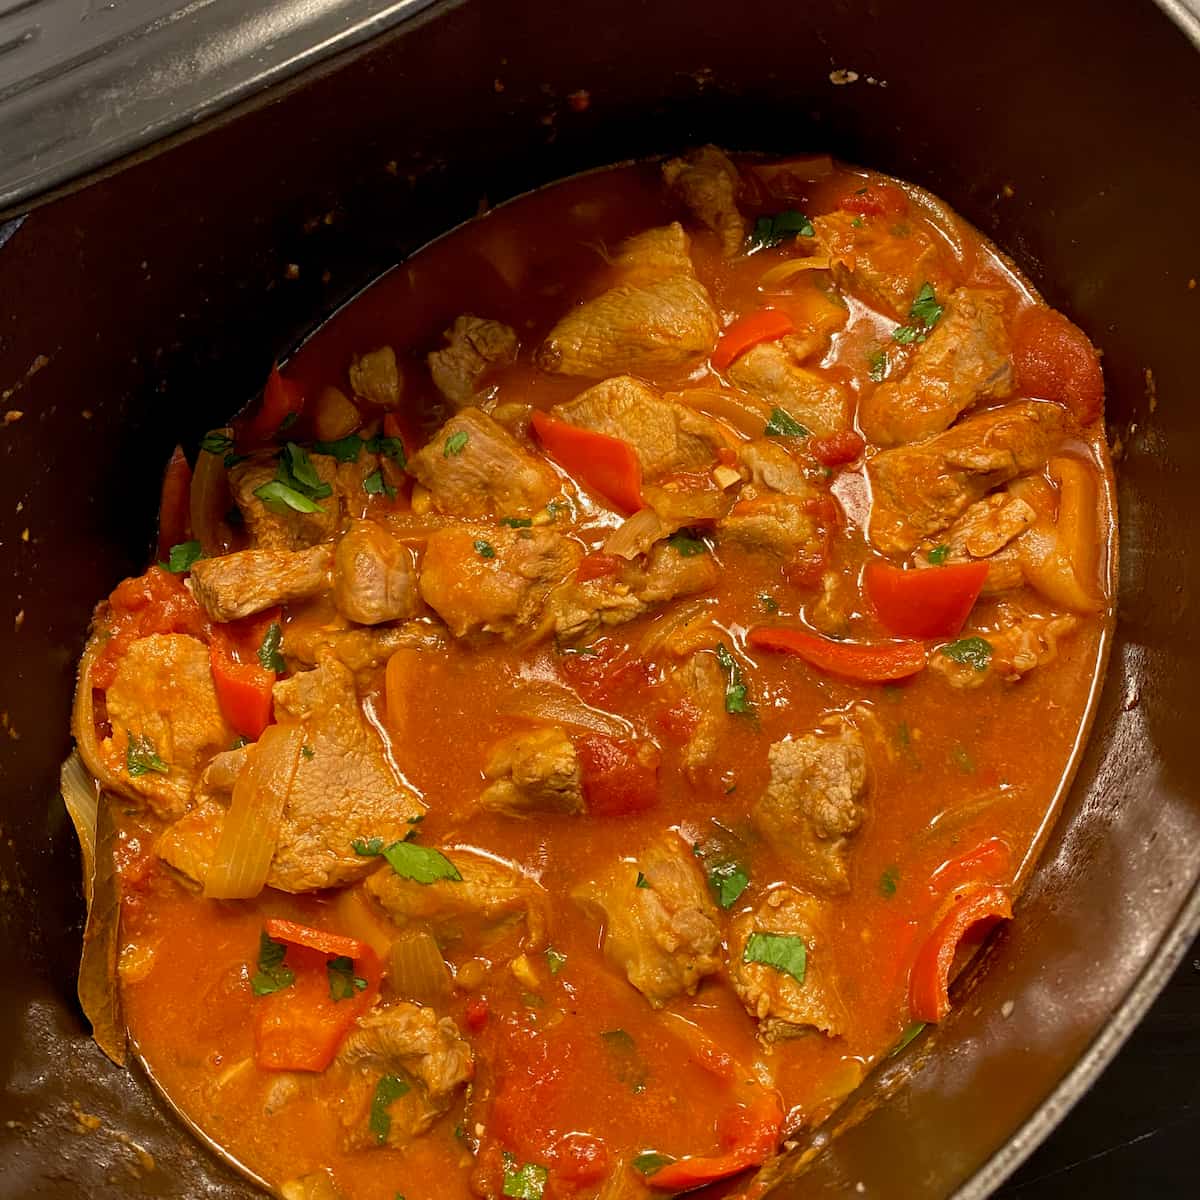 vibrant red tomato bubbling sauce with veal and vegetables in a crock pot